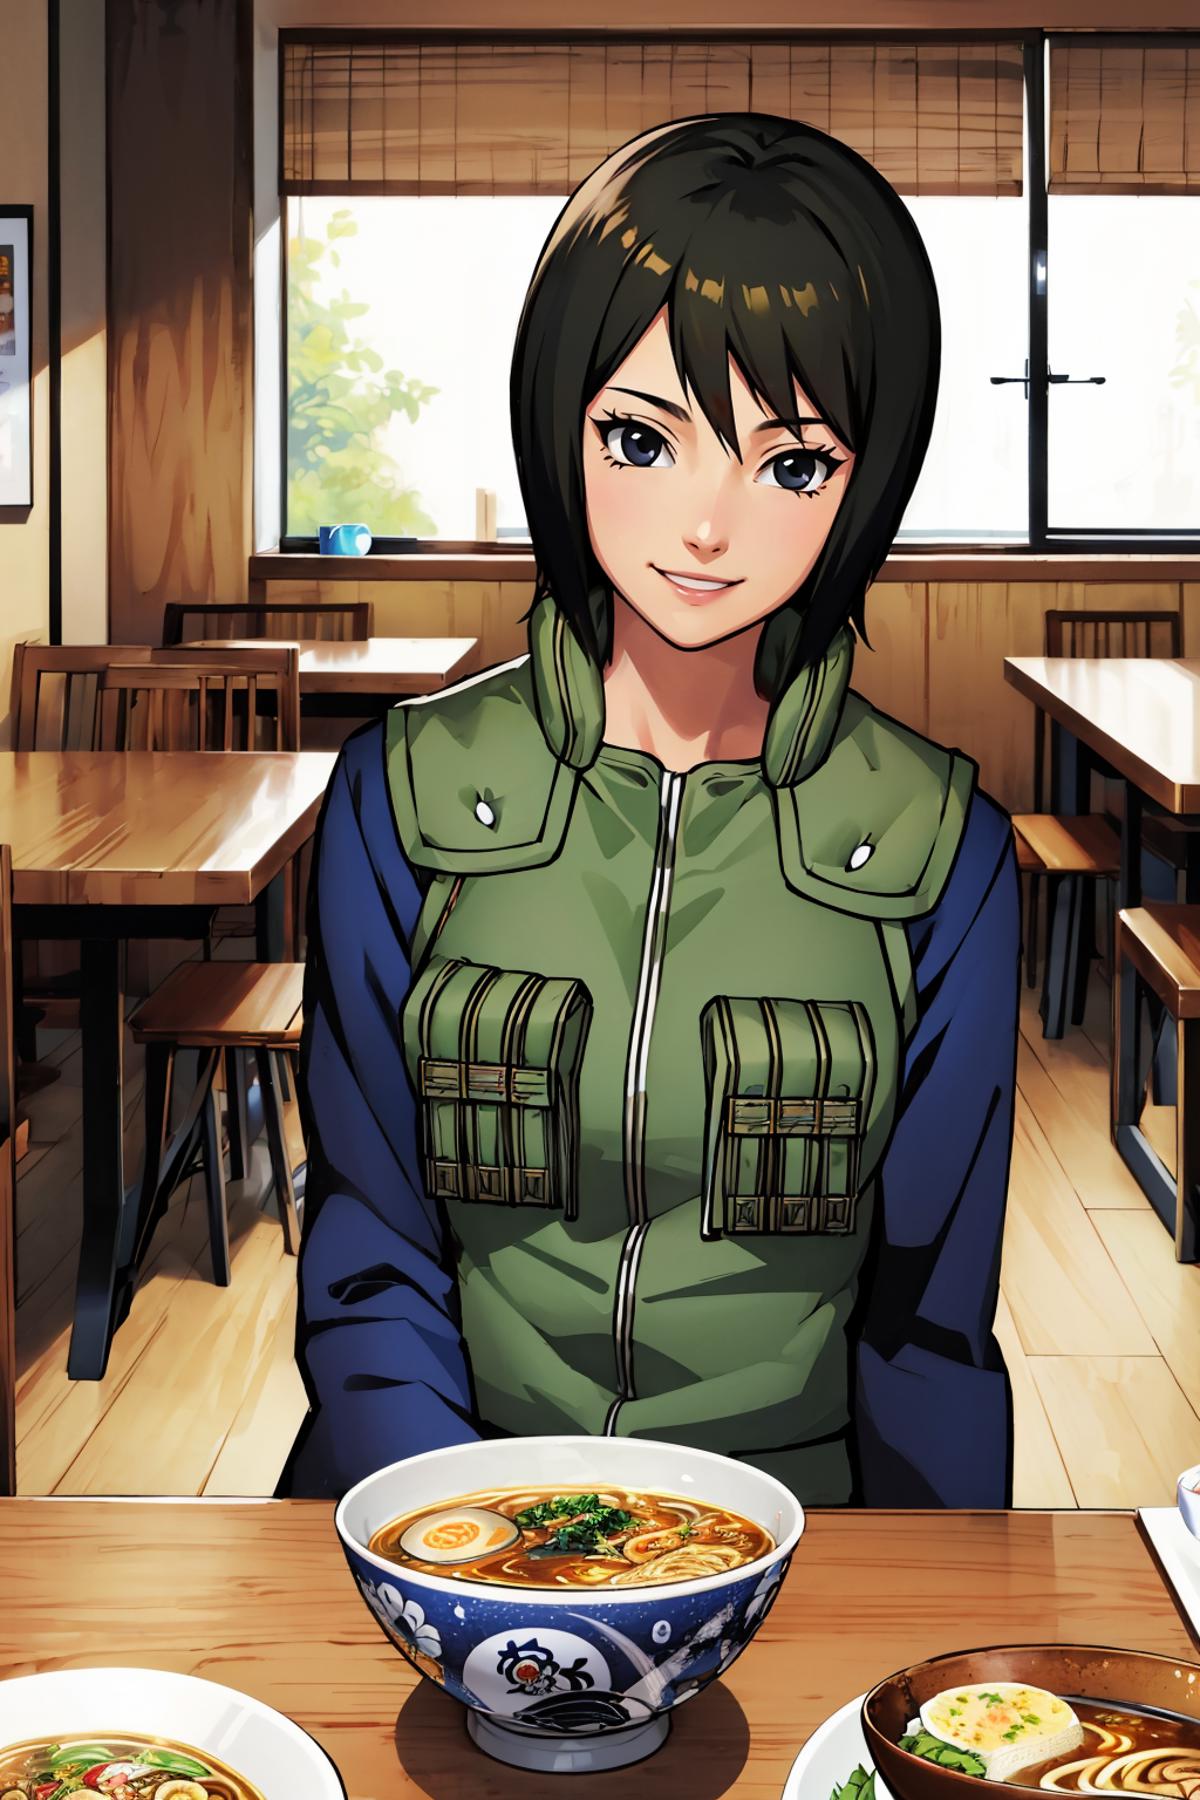 A young girl in a green jacket is sitting at a table with a bowl of soup.